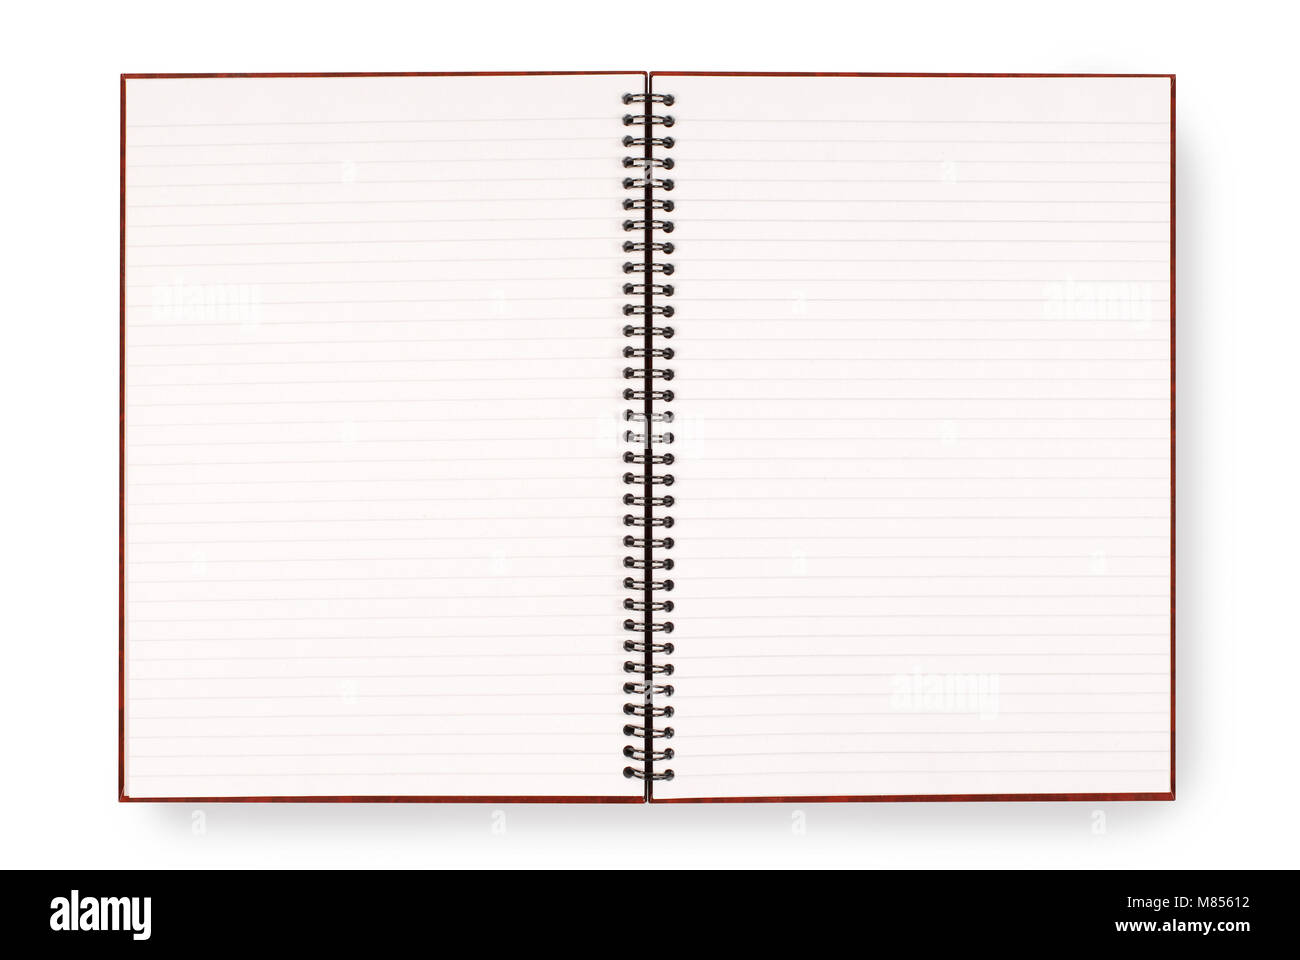 Writing Or Exercise Book With Lined Blank White Pages Isolated On A White  Background Stock Photo - Alamy